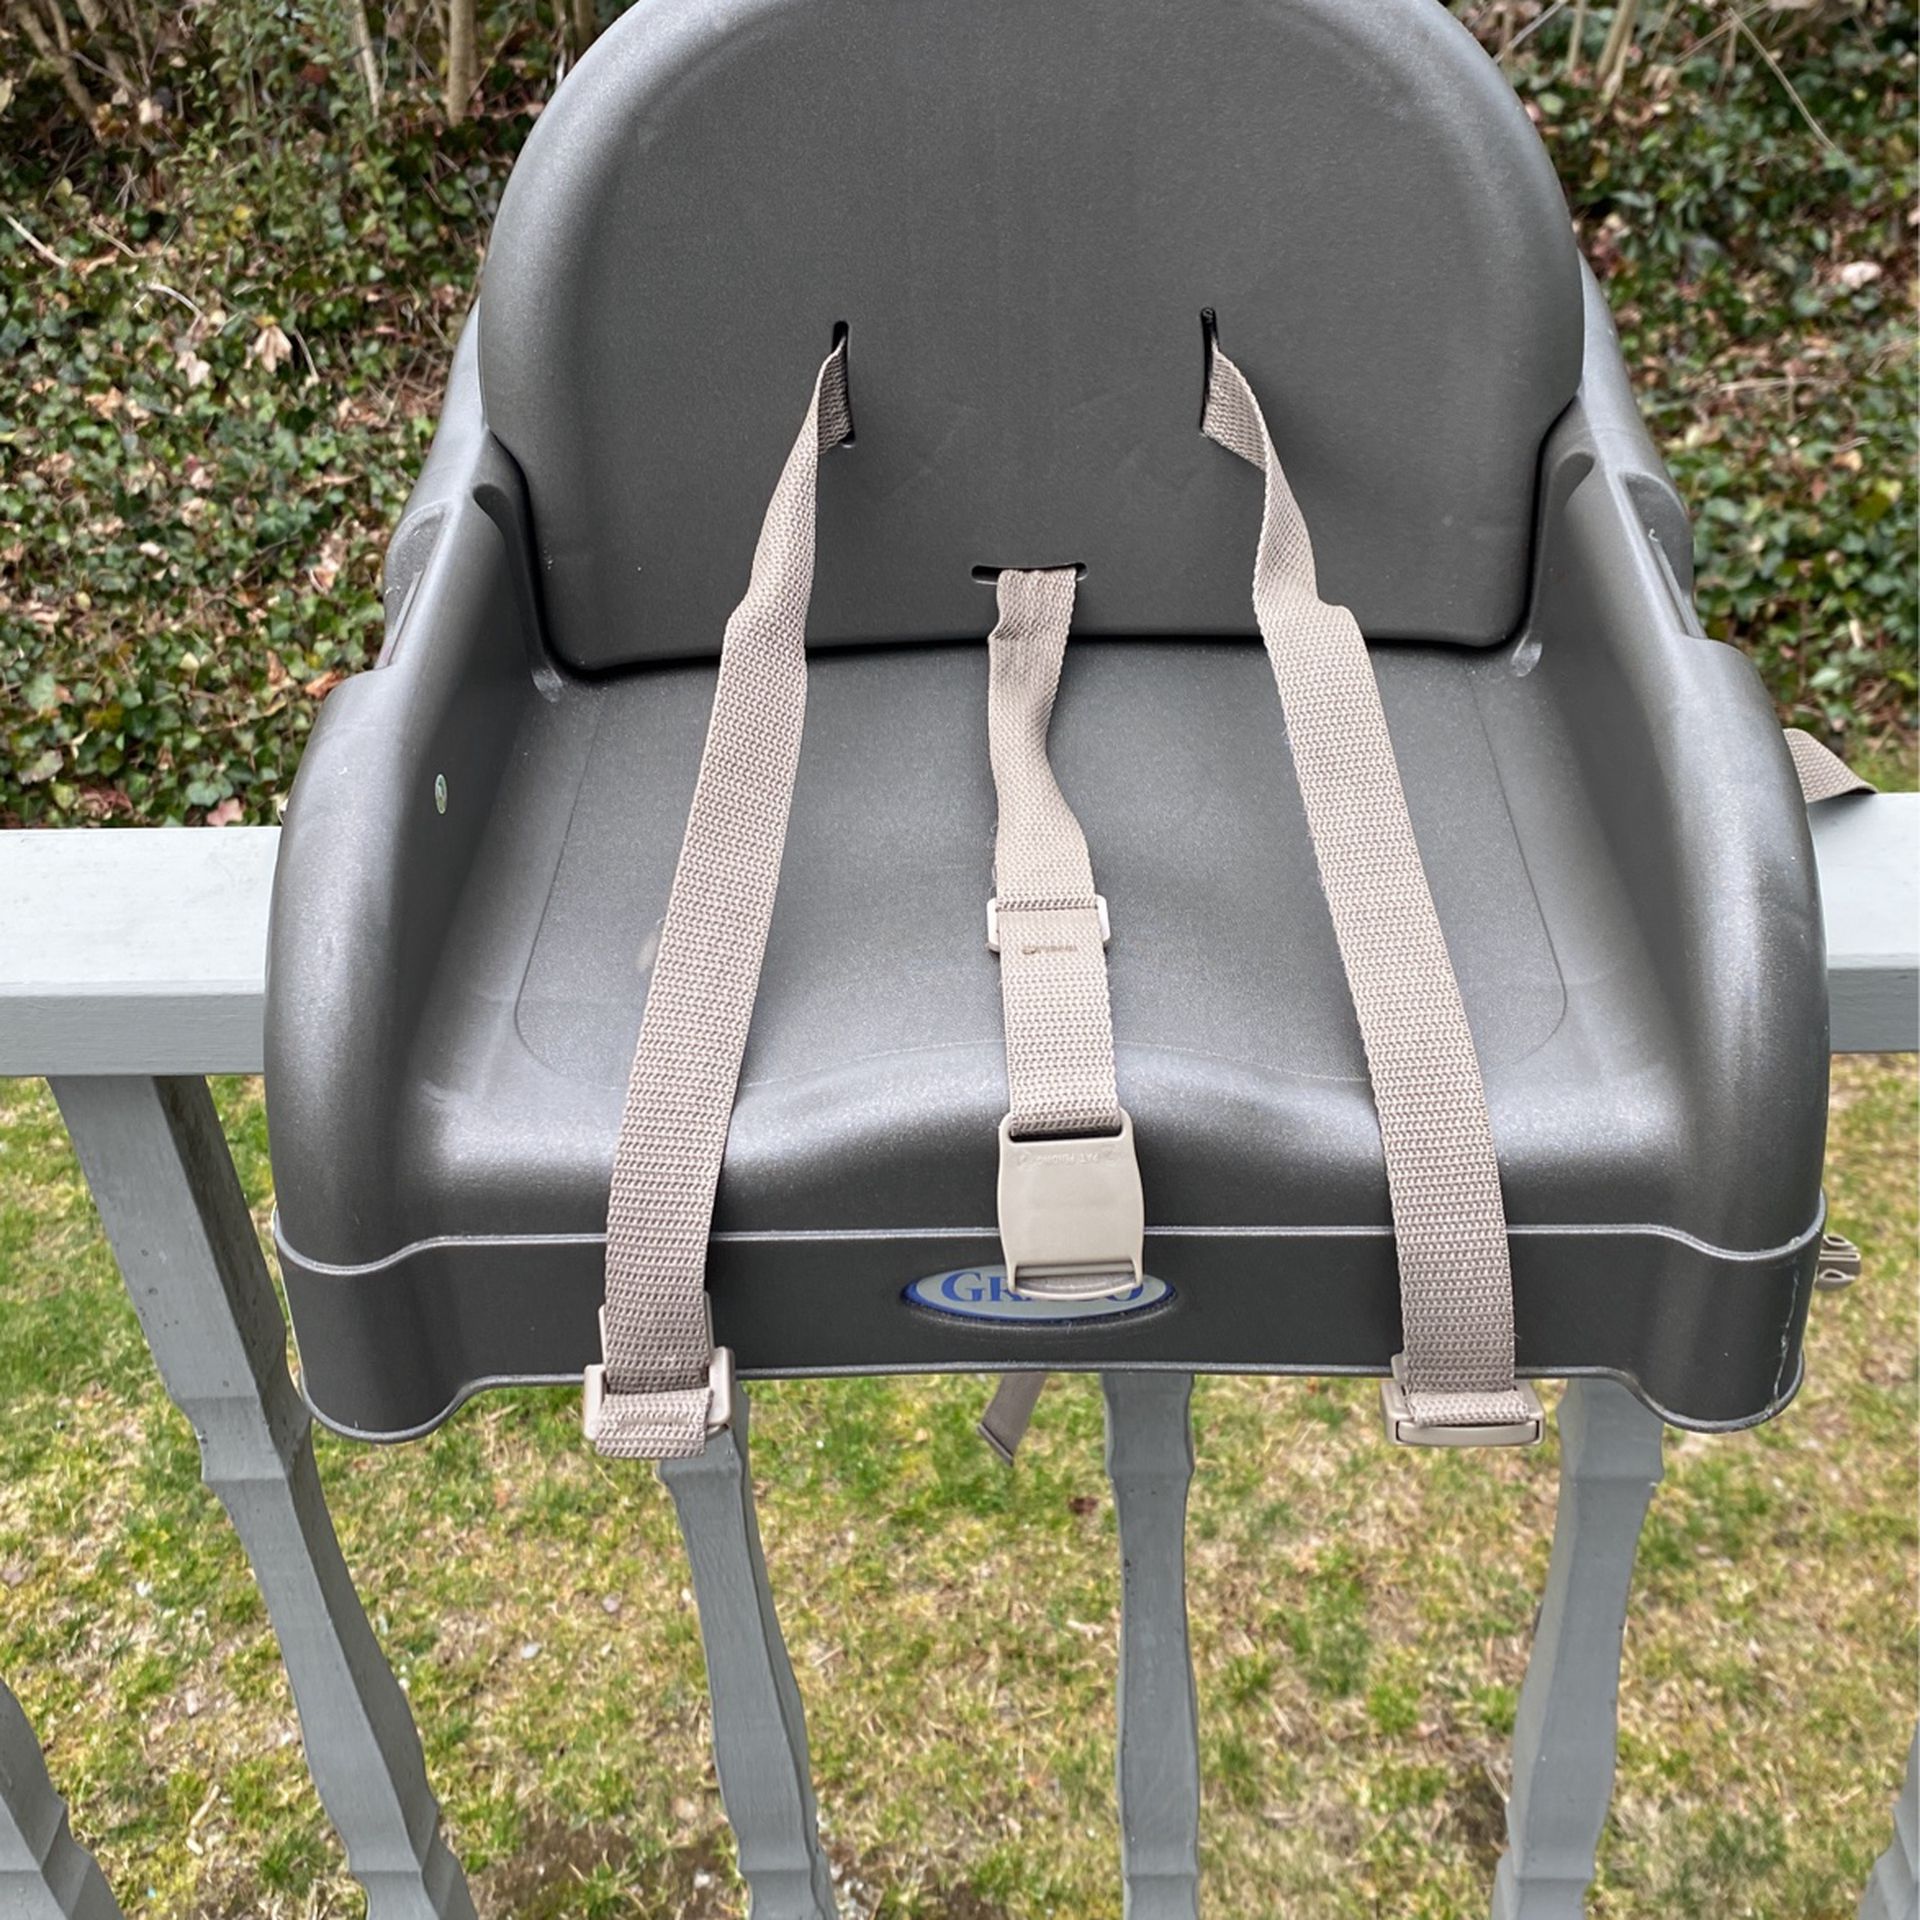 Graco Booster Seat For Kitchen Chair